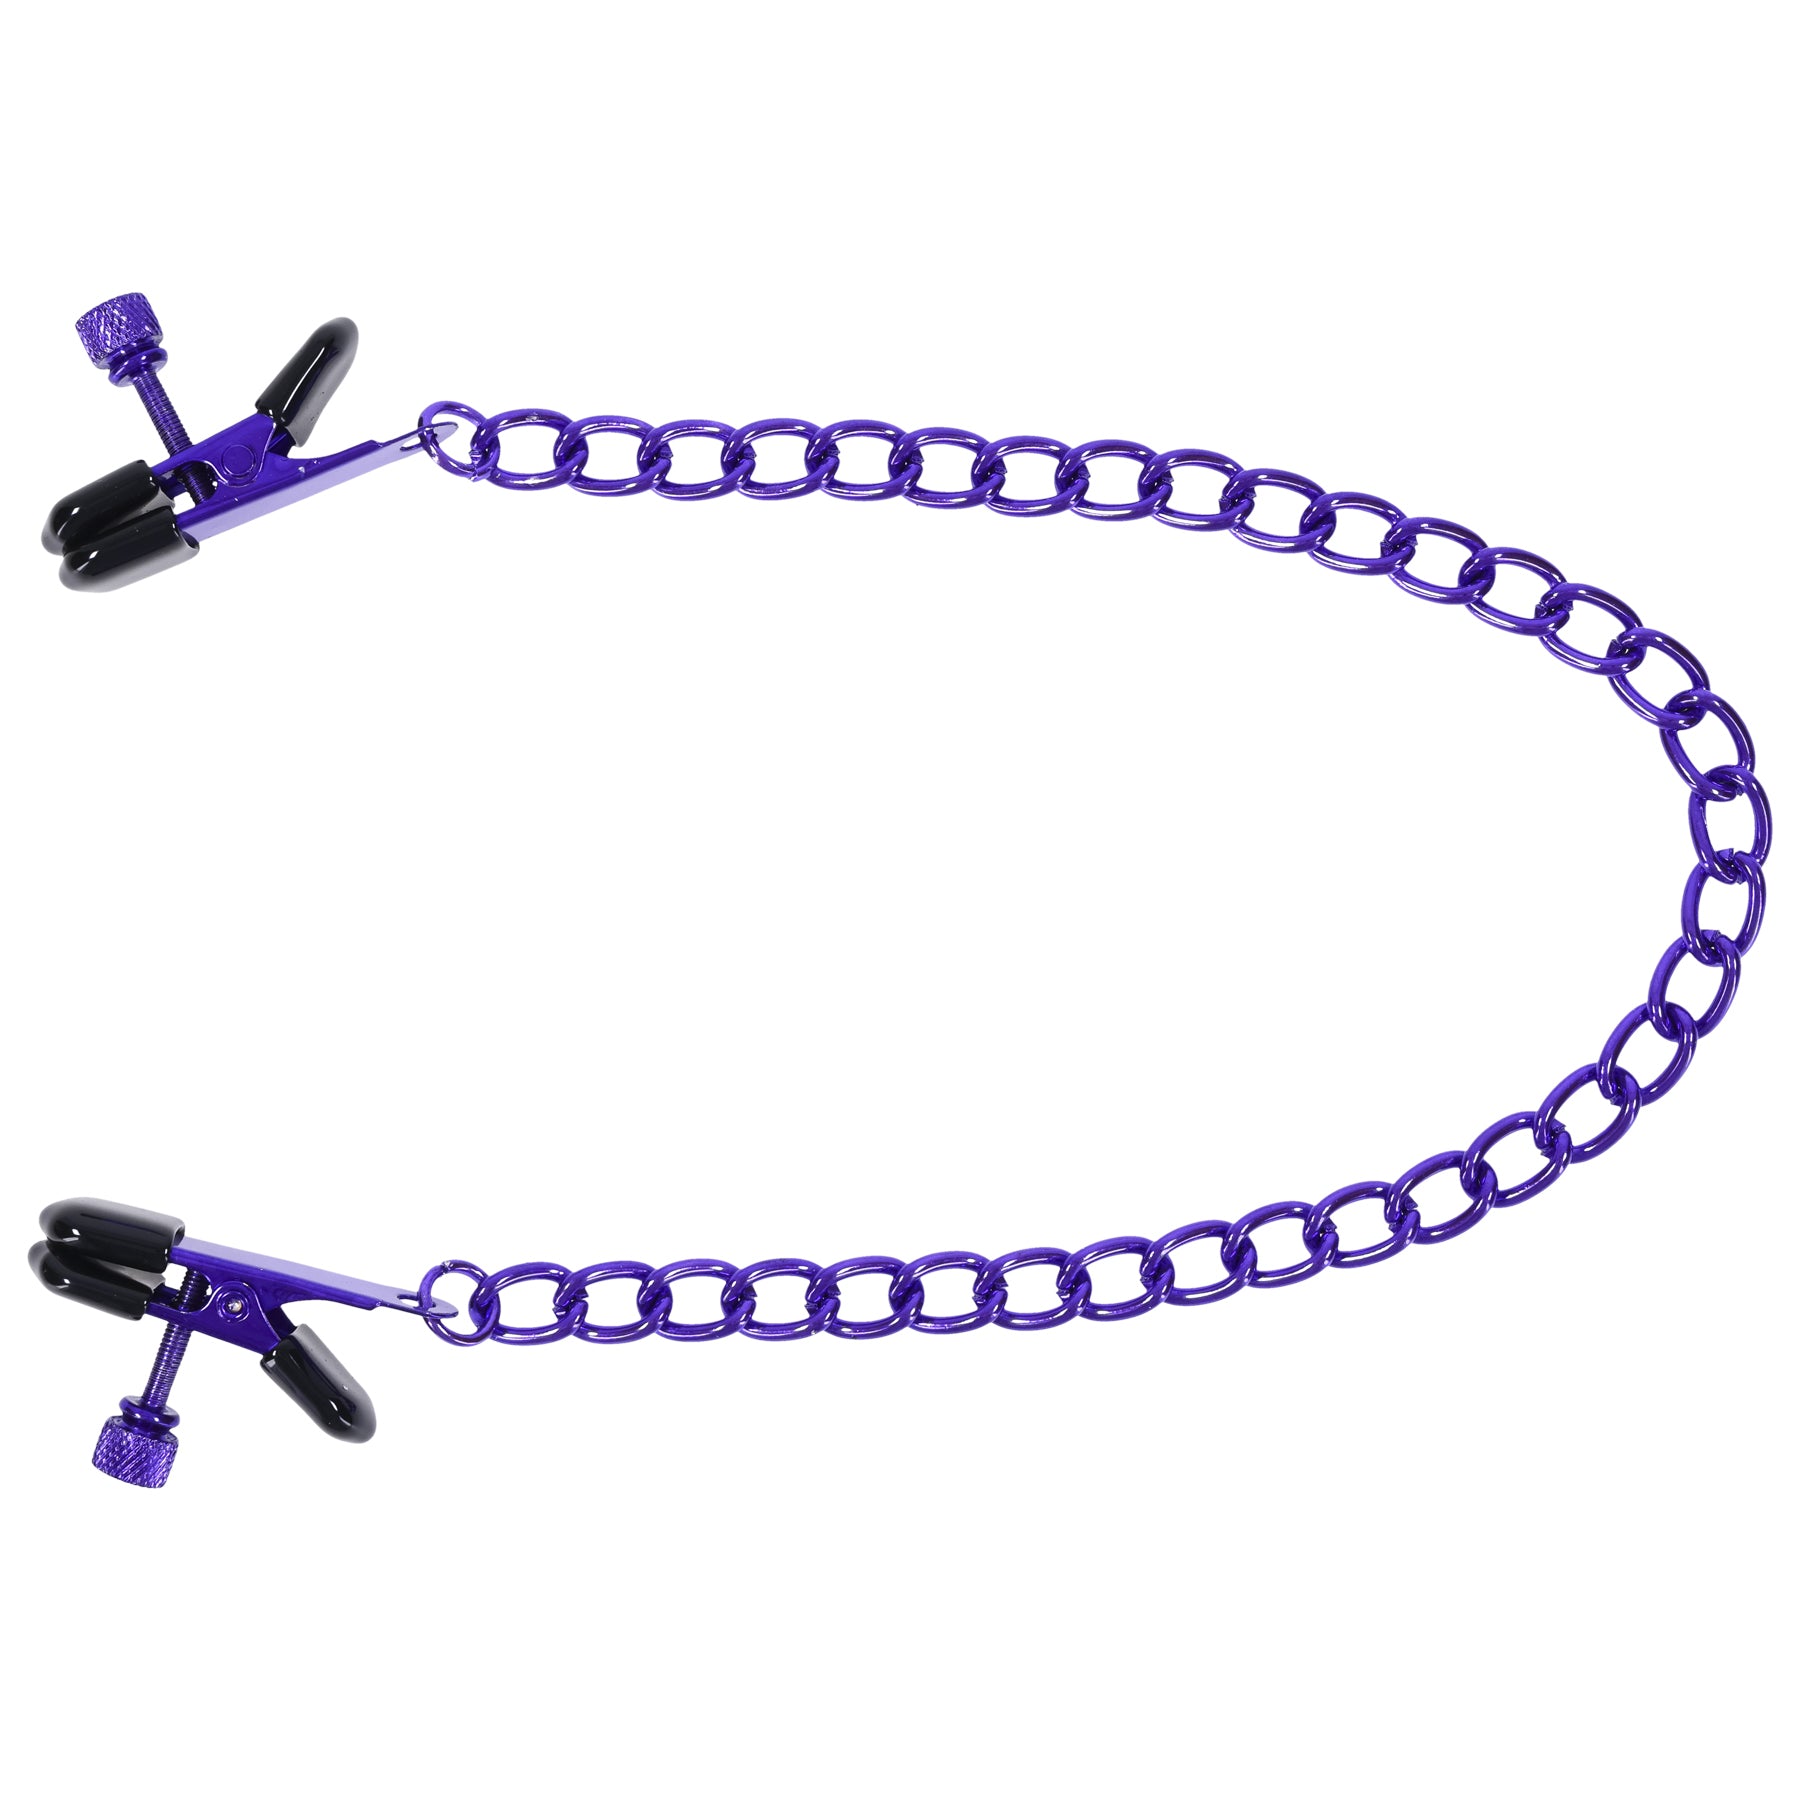 Merci - Chained Up - Nipple Clamps - Violet/black-2